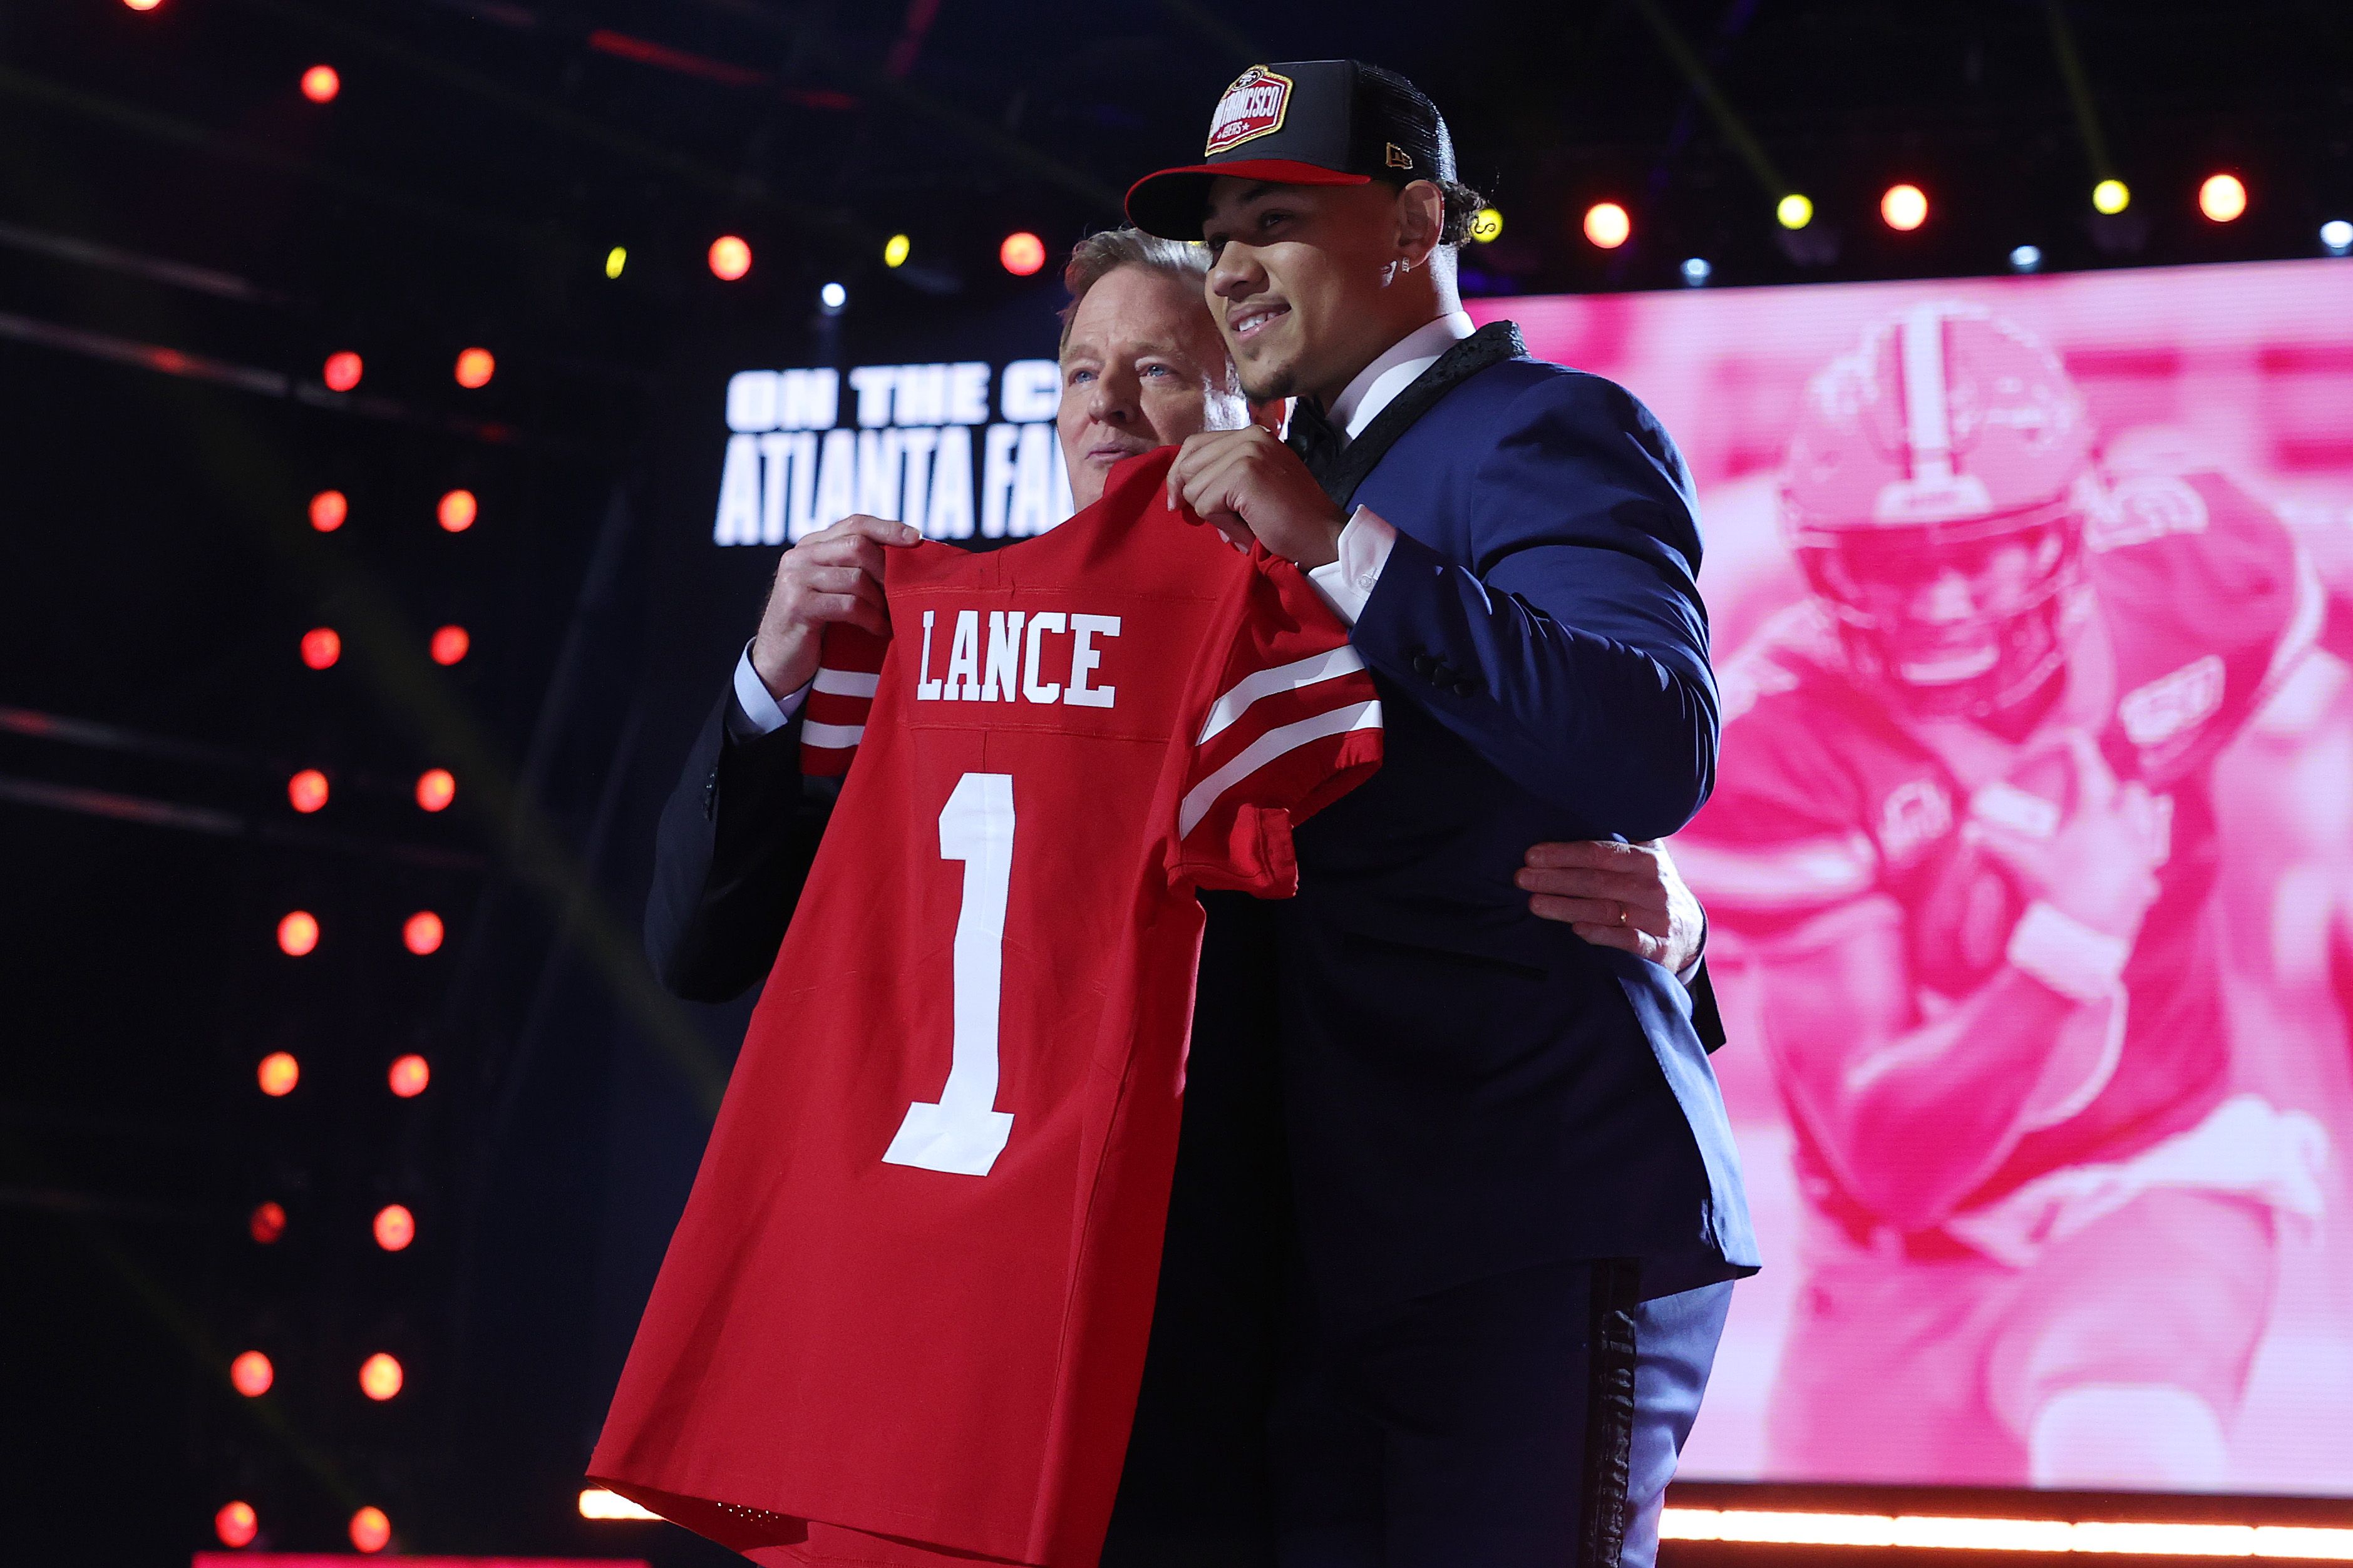 Trey Lance on stage at the NFL Draft.